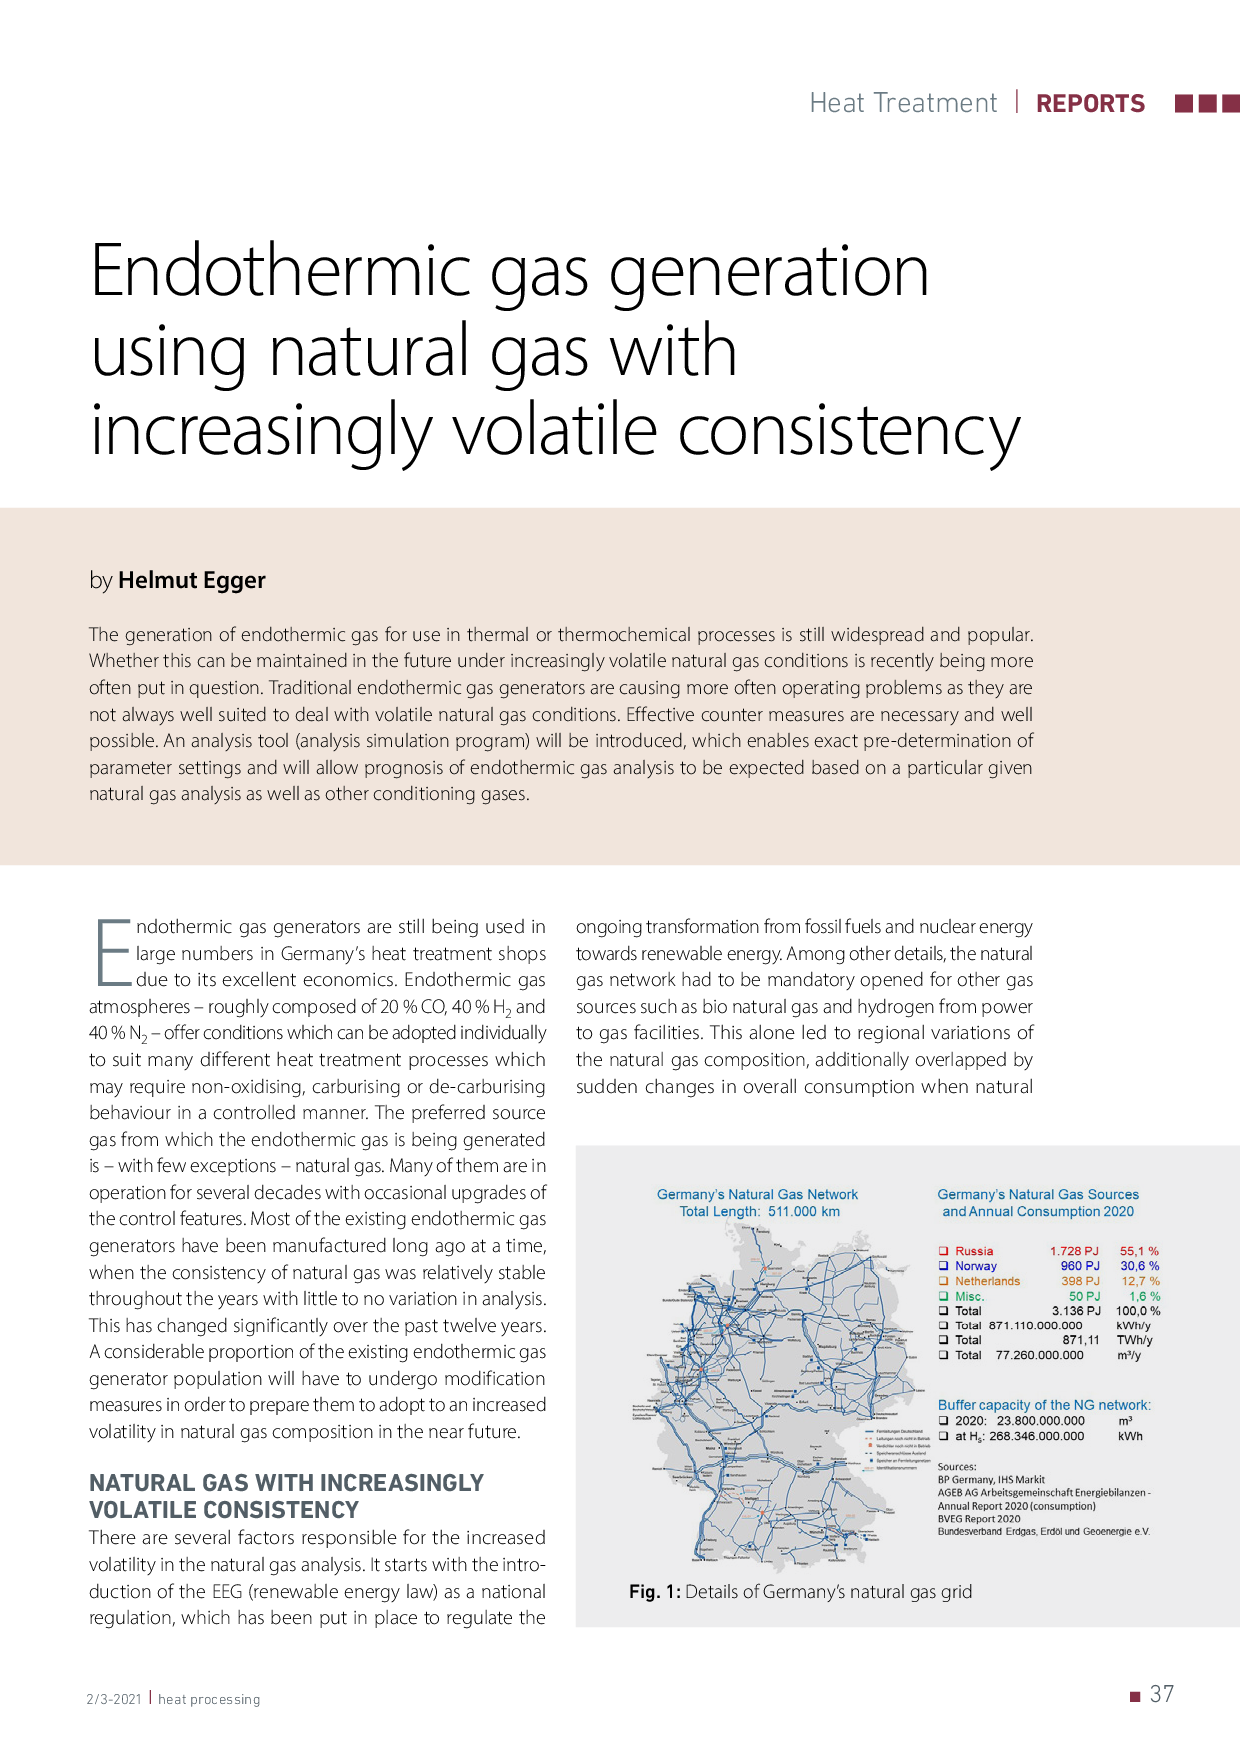 Endothermic gas generation using natural gas with increasingly volatile consistency